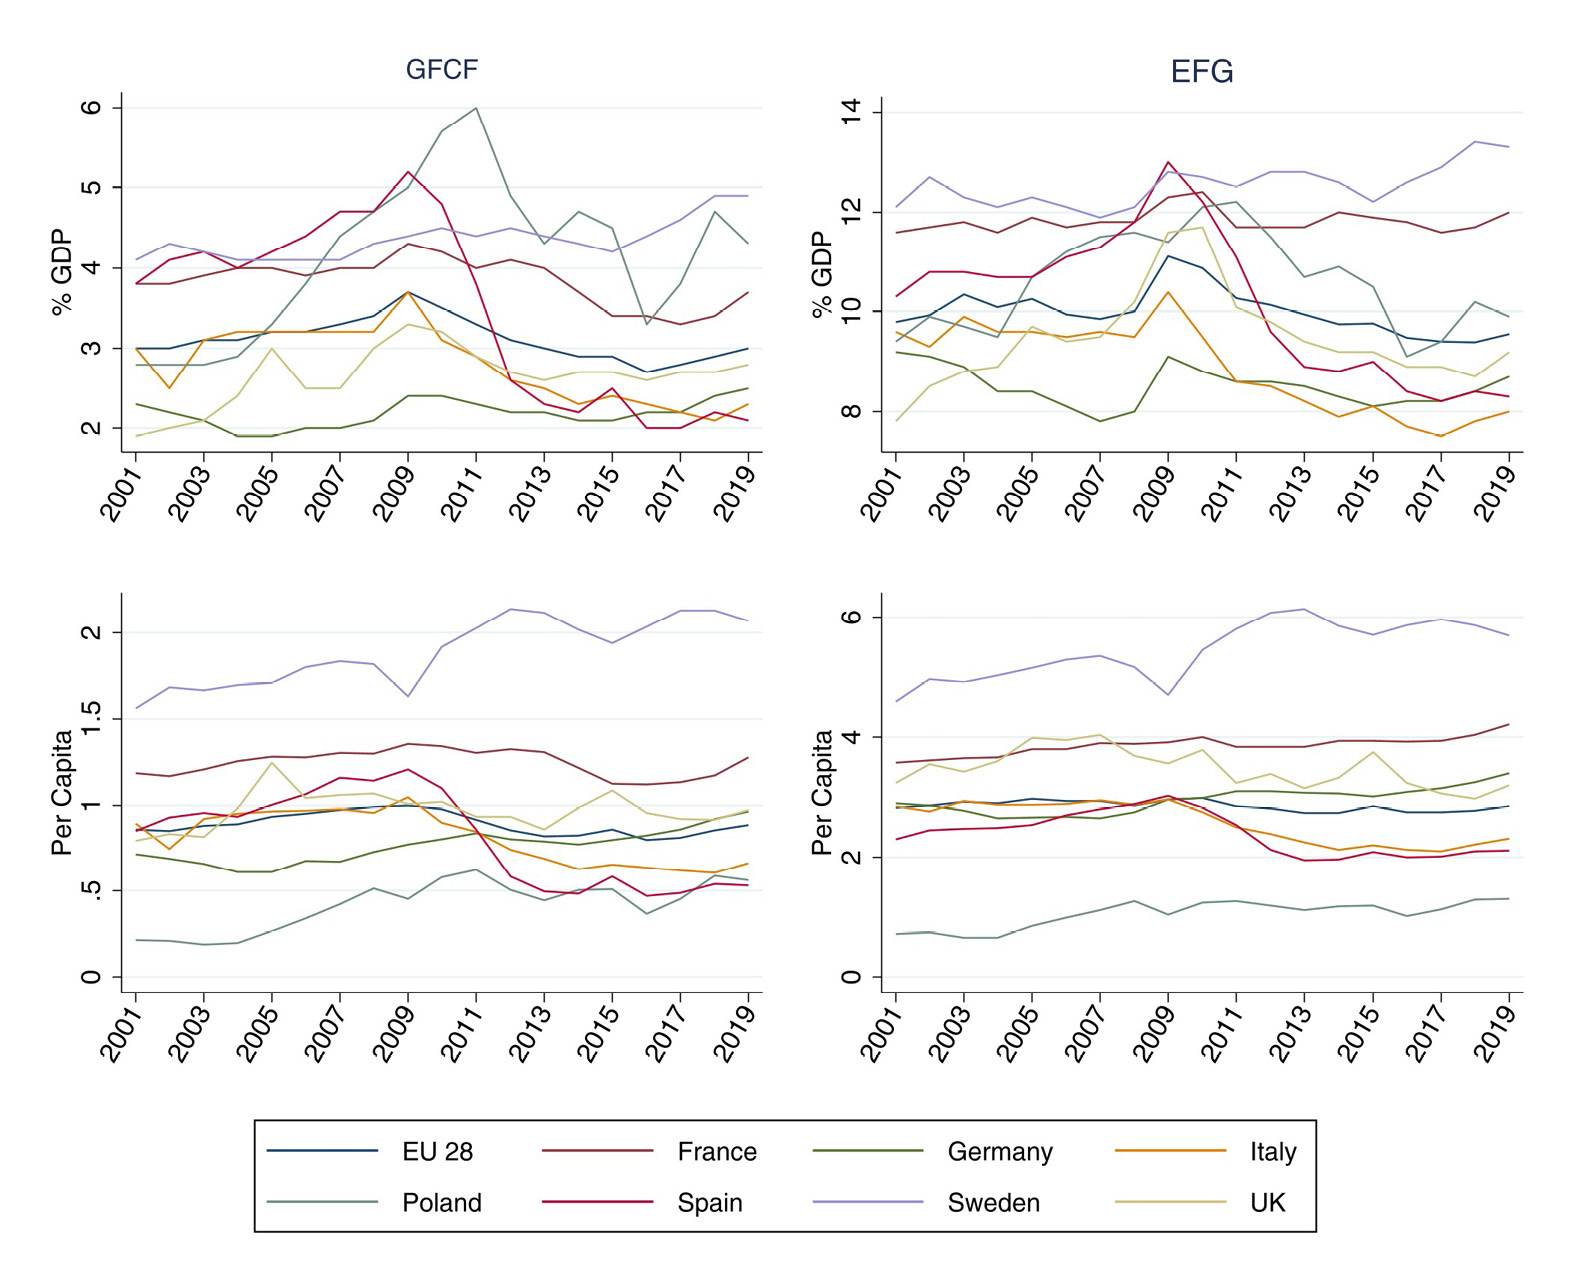 Line chart showing the trend of GFCF and EFG in percentage and per capita between 2001 and 2019. The two graphs on top shows the GFCF and the EFG in percentage to GDP, while the bottom two show the GFCF and the EFG as per capita distribution.